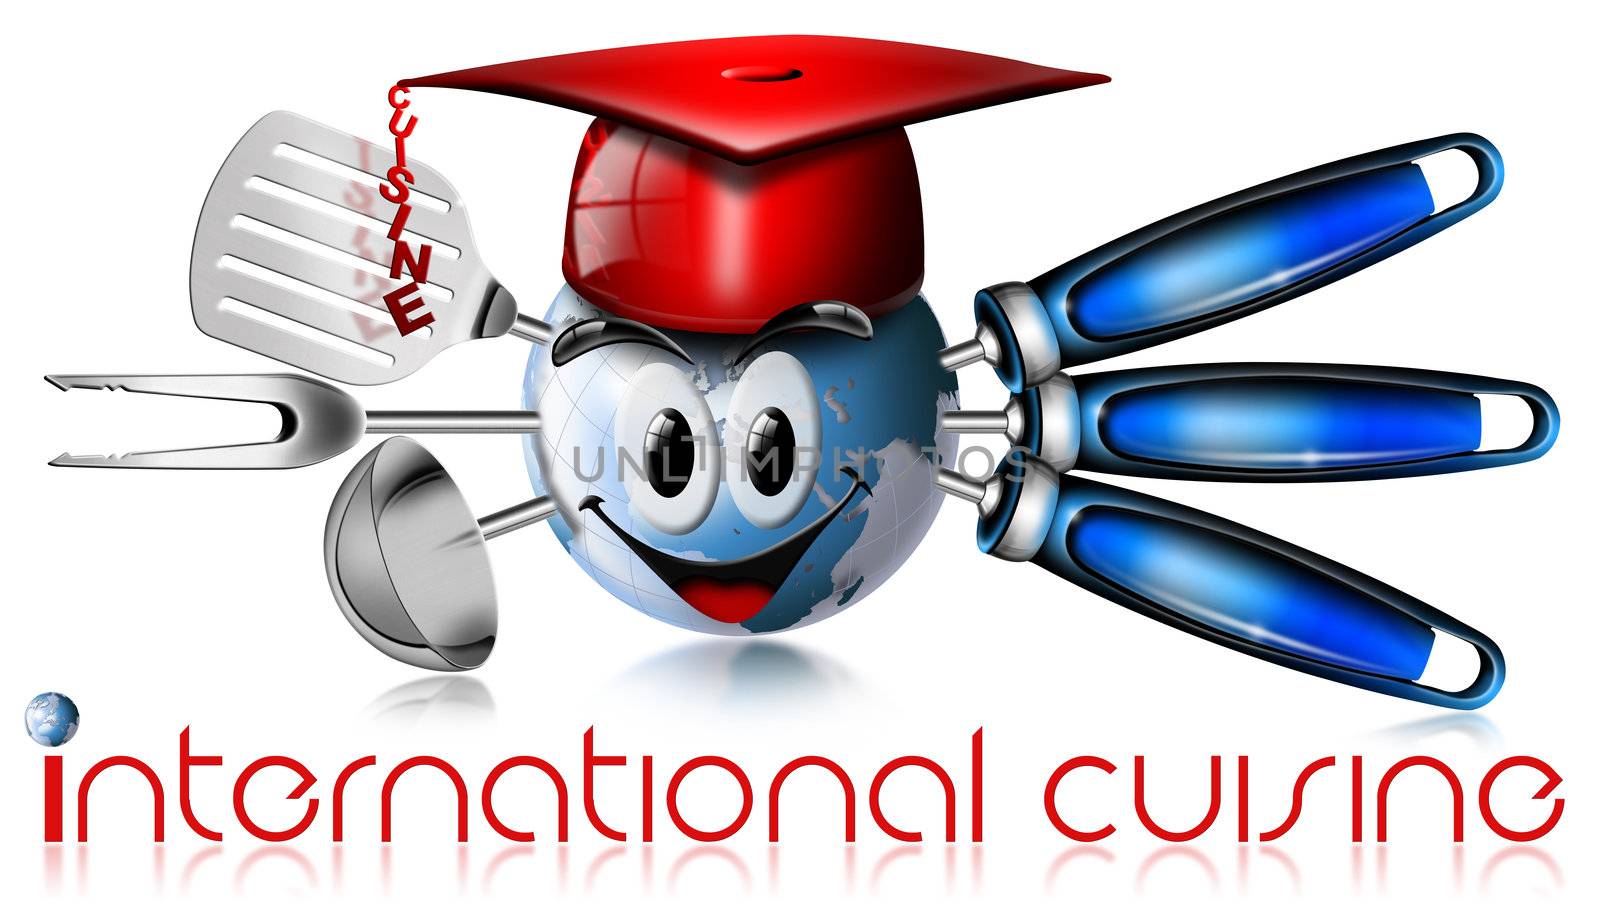 Illustration with three kitchen tools and globe smiling with written "international cuisine"